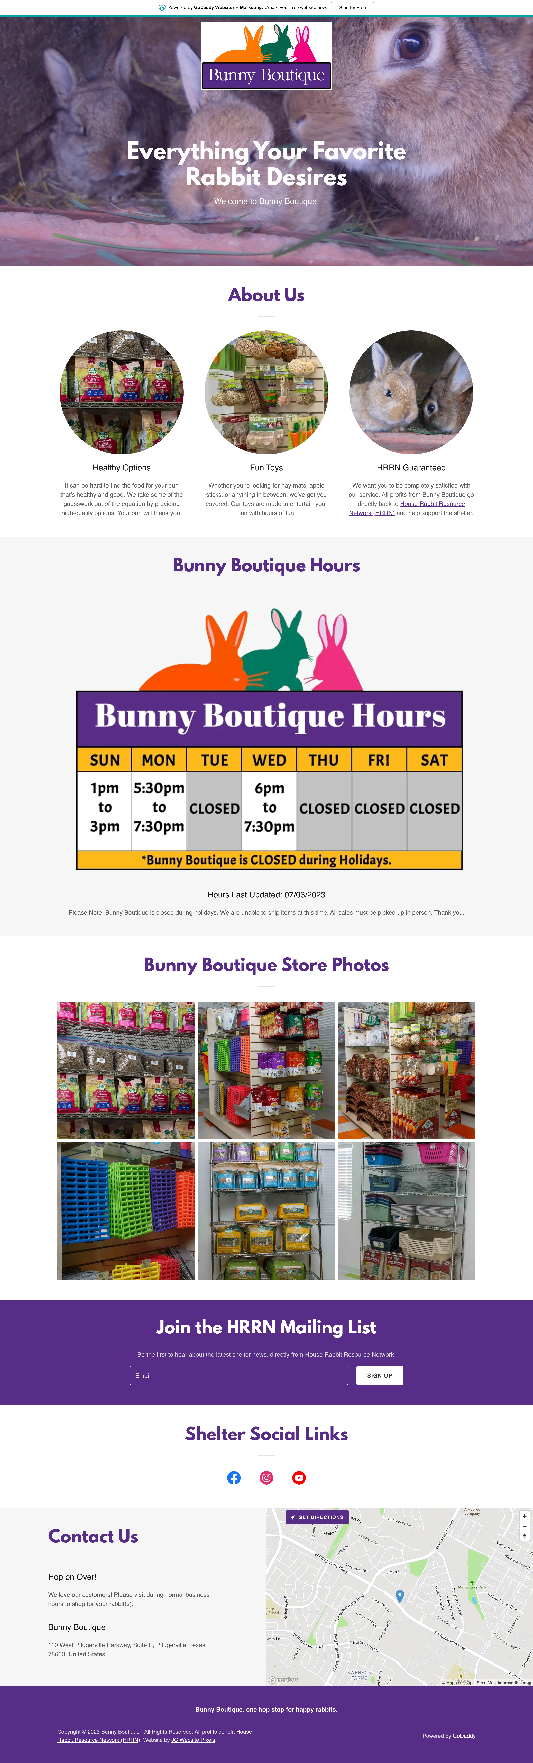 Landing Page: Bunny Boutique Full View